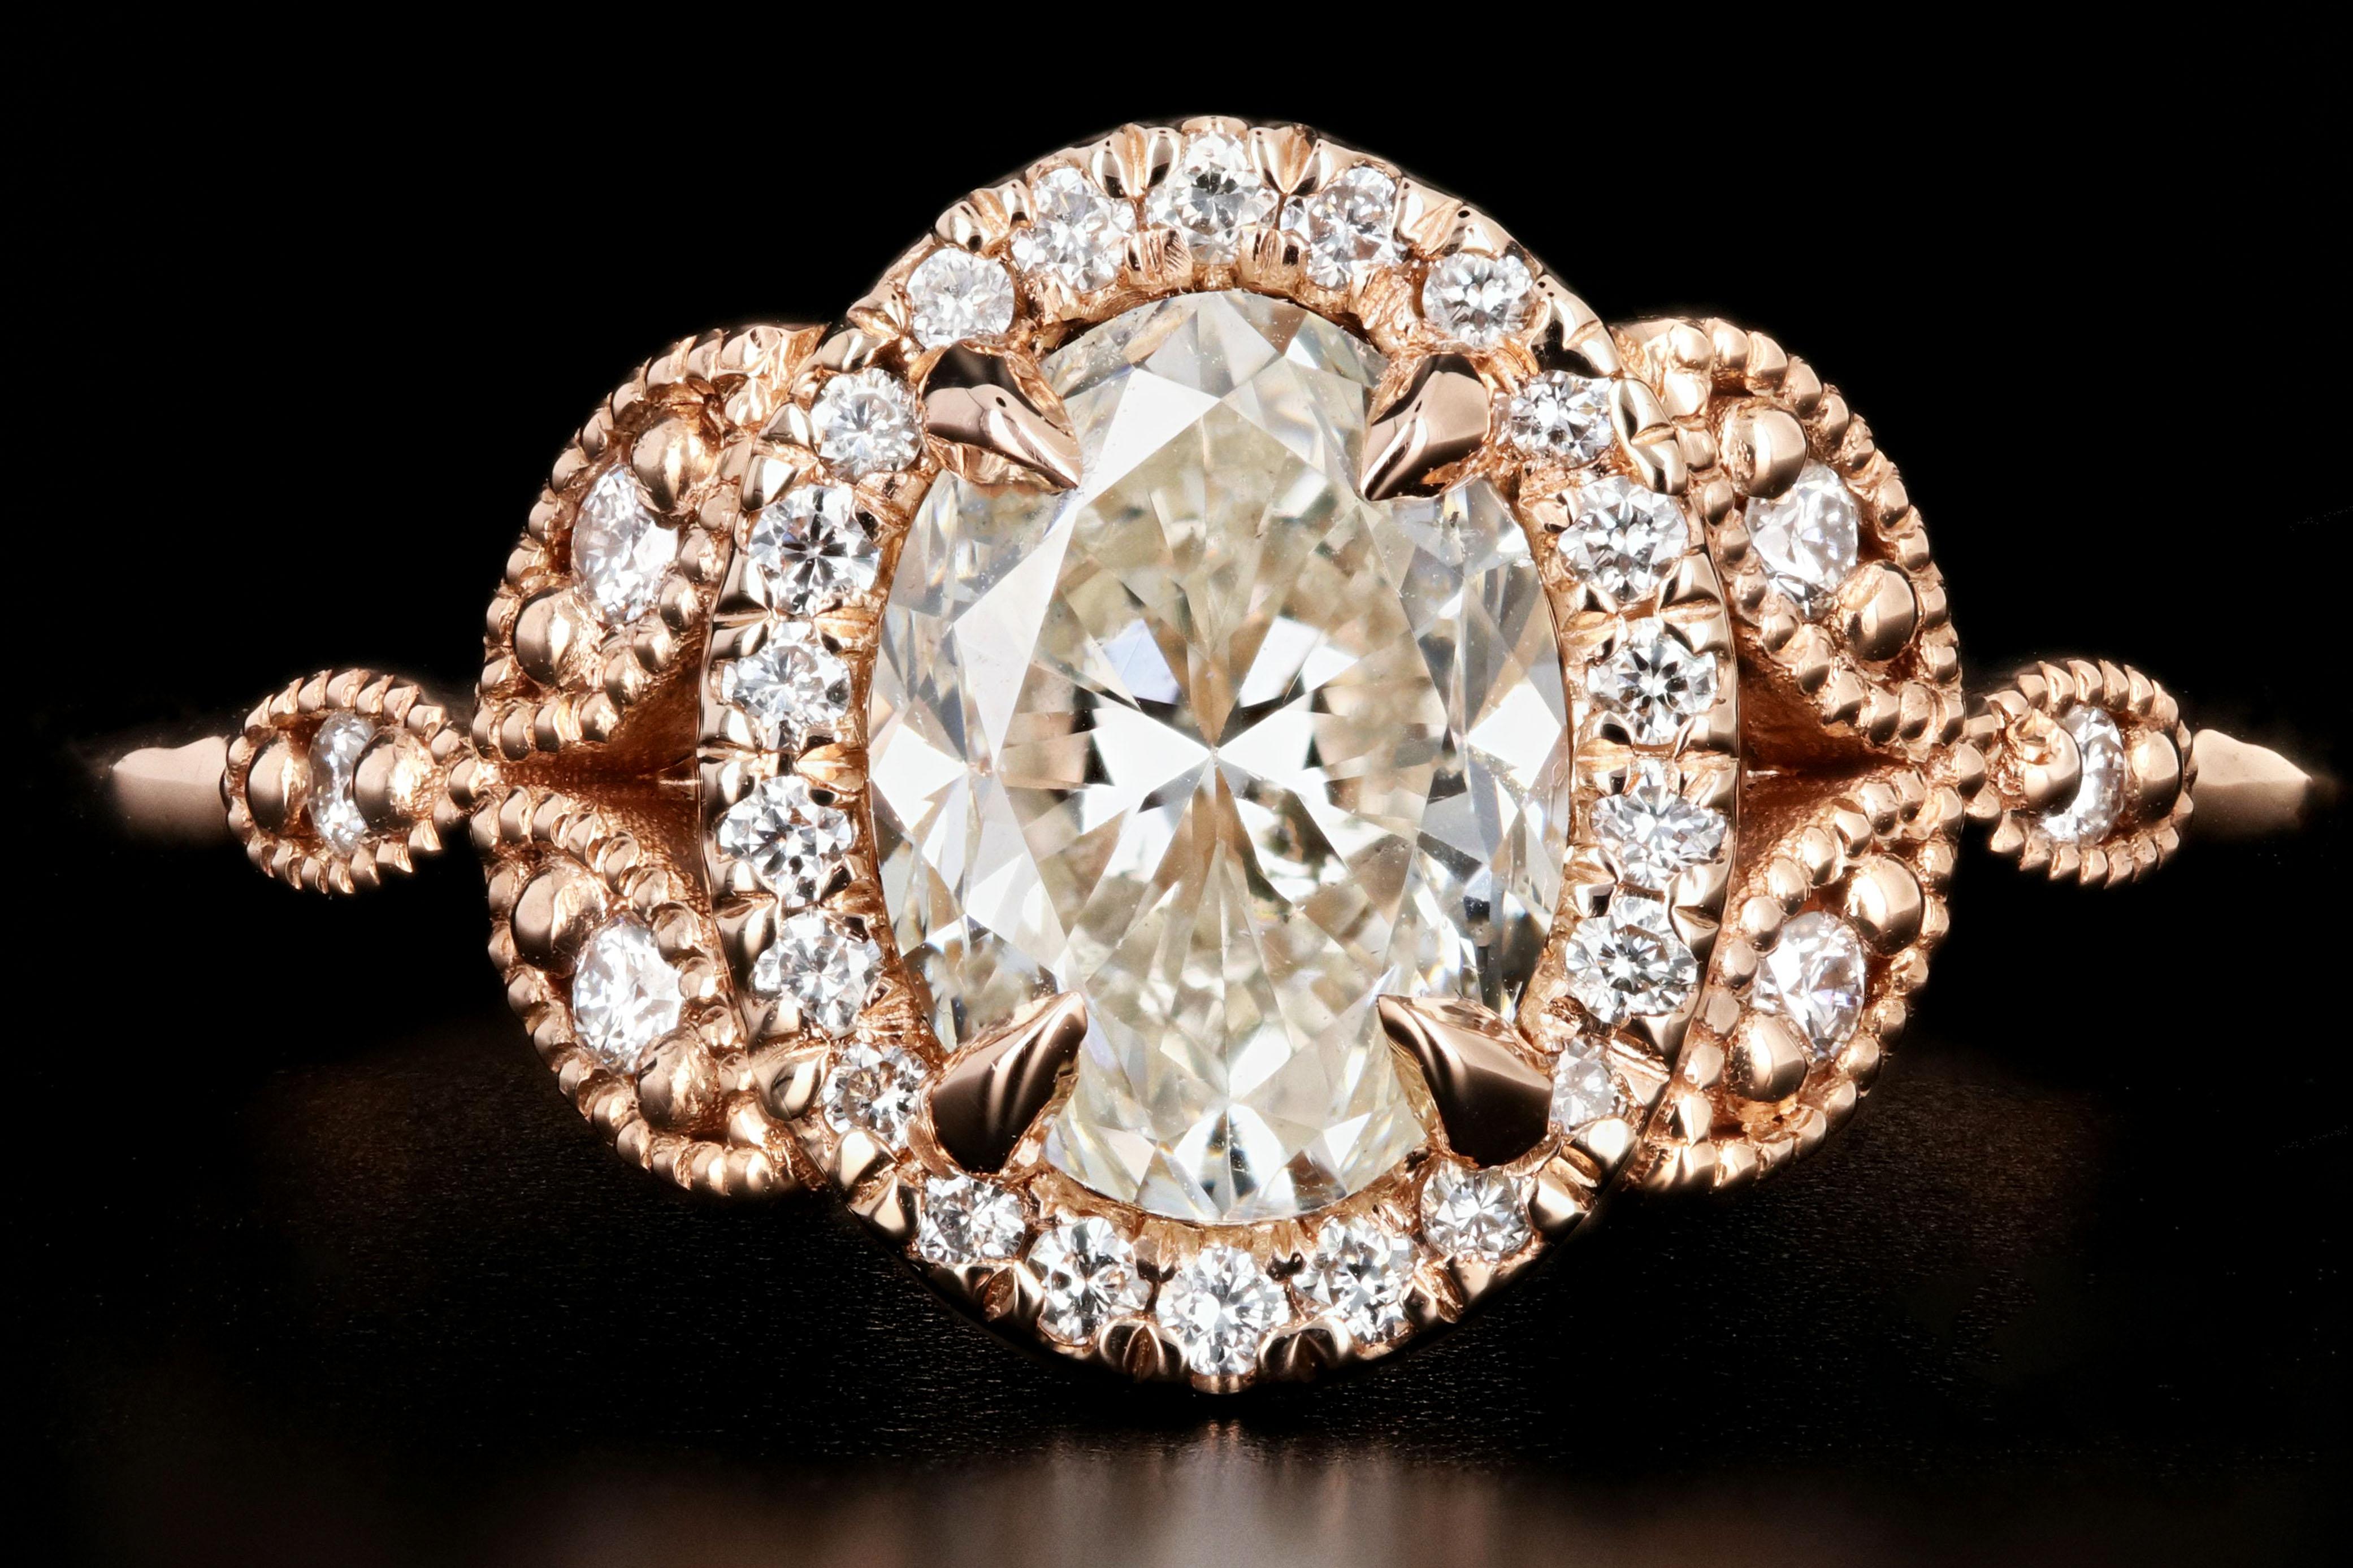 Era: New

Composition: 18K Rose Gold

Primary Stone: Oval Cut Diamond

Carat Weight: 1.22 Carats

Color: J

Clarity: SI2

Accent Stone: Round Brilliant Cut Diamonds

Carat Weight: .17 Carats

Color: G-H

Clarity: Vs

Total Carat Weight: 1.39